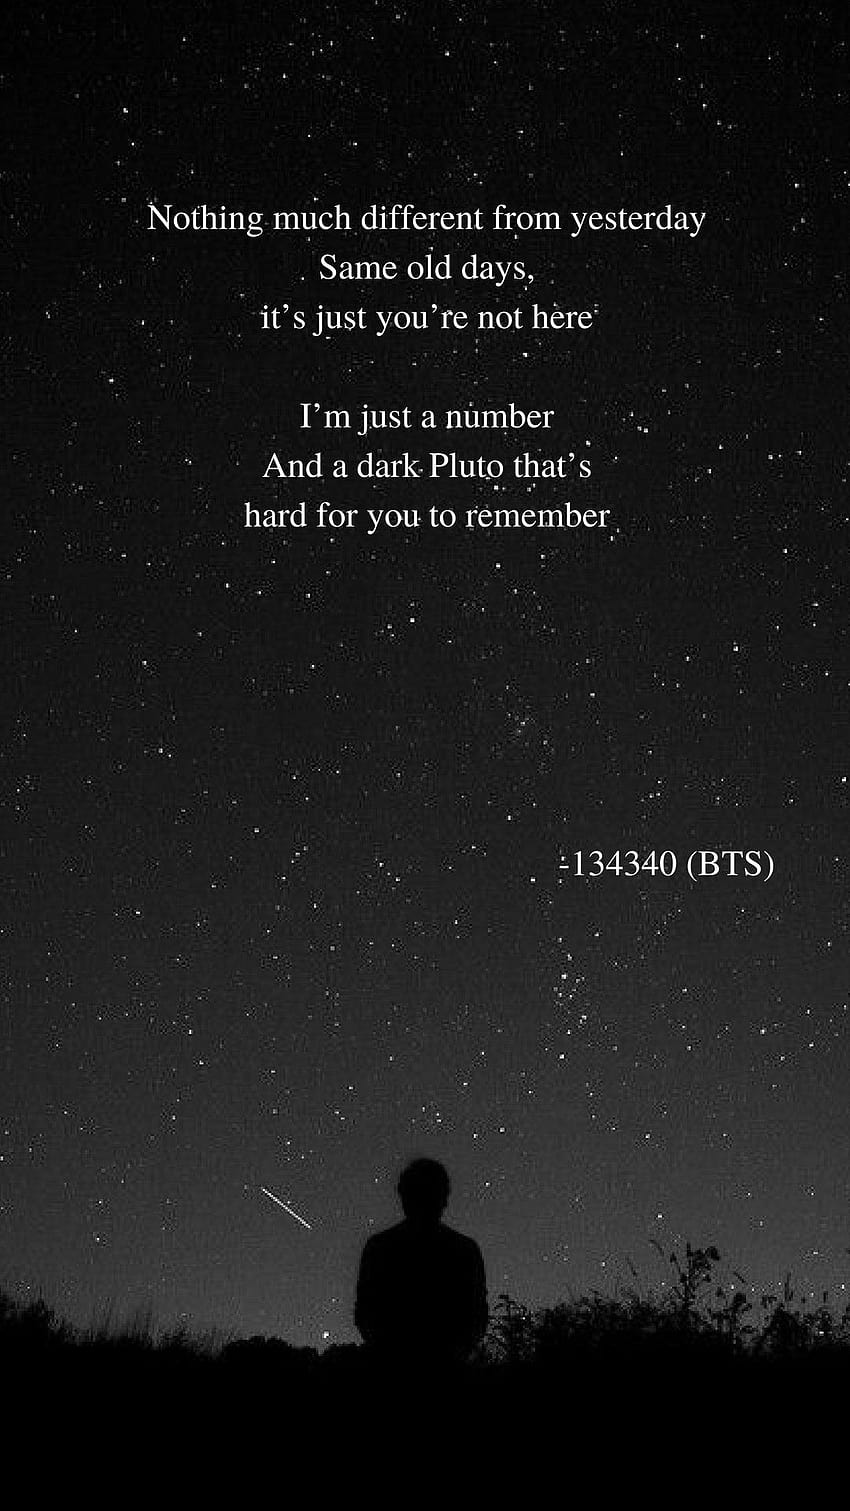 BTS Lyric Quotes on Dog, rm inspirational quotes HD phone wallpaper